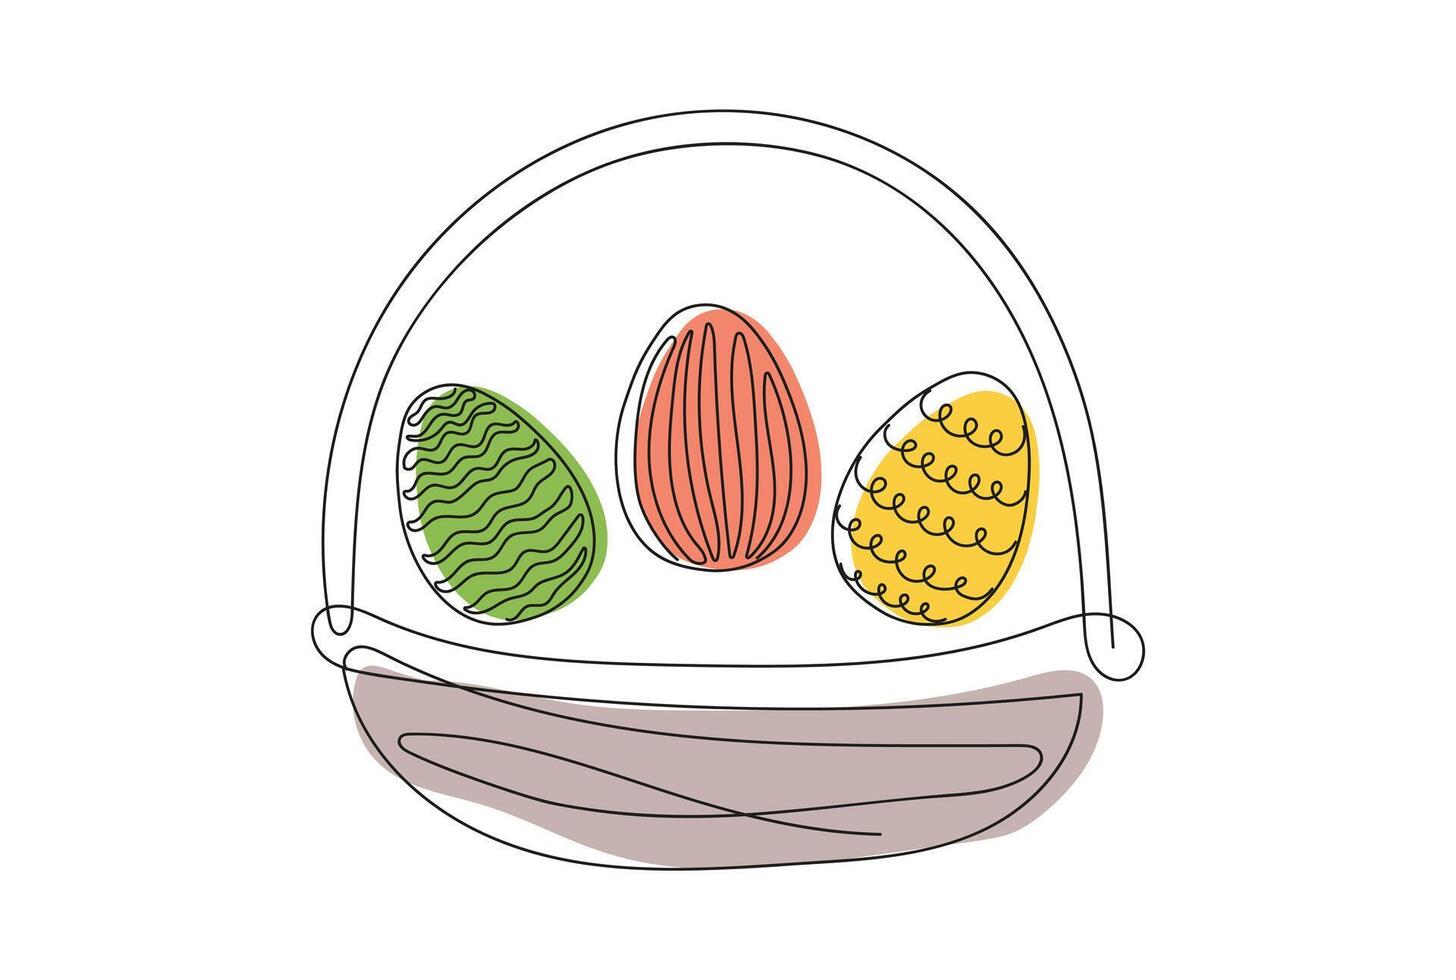 Wicker basket with colorful Easter eggs. Continuous one line drawing. illustration isolated on white background. Festive decoration. For Easter promotions, greeting cards, holiday invitations vector